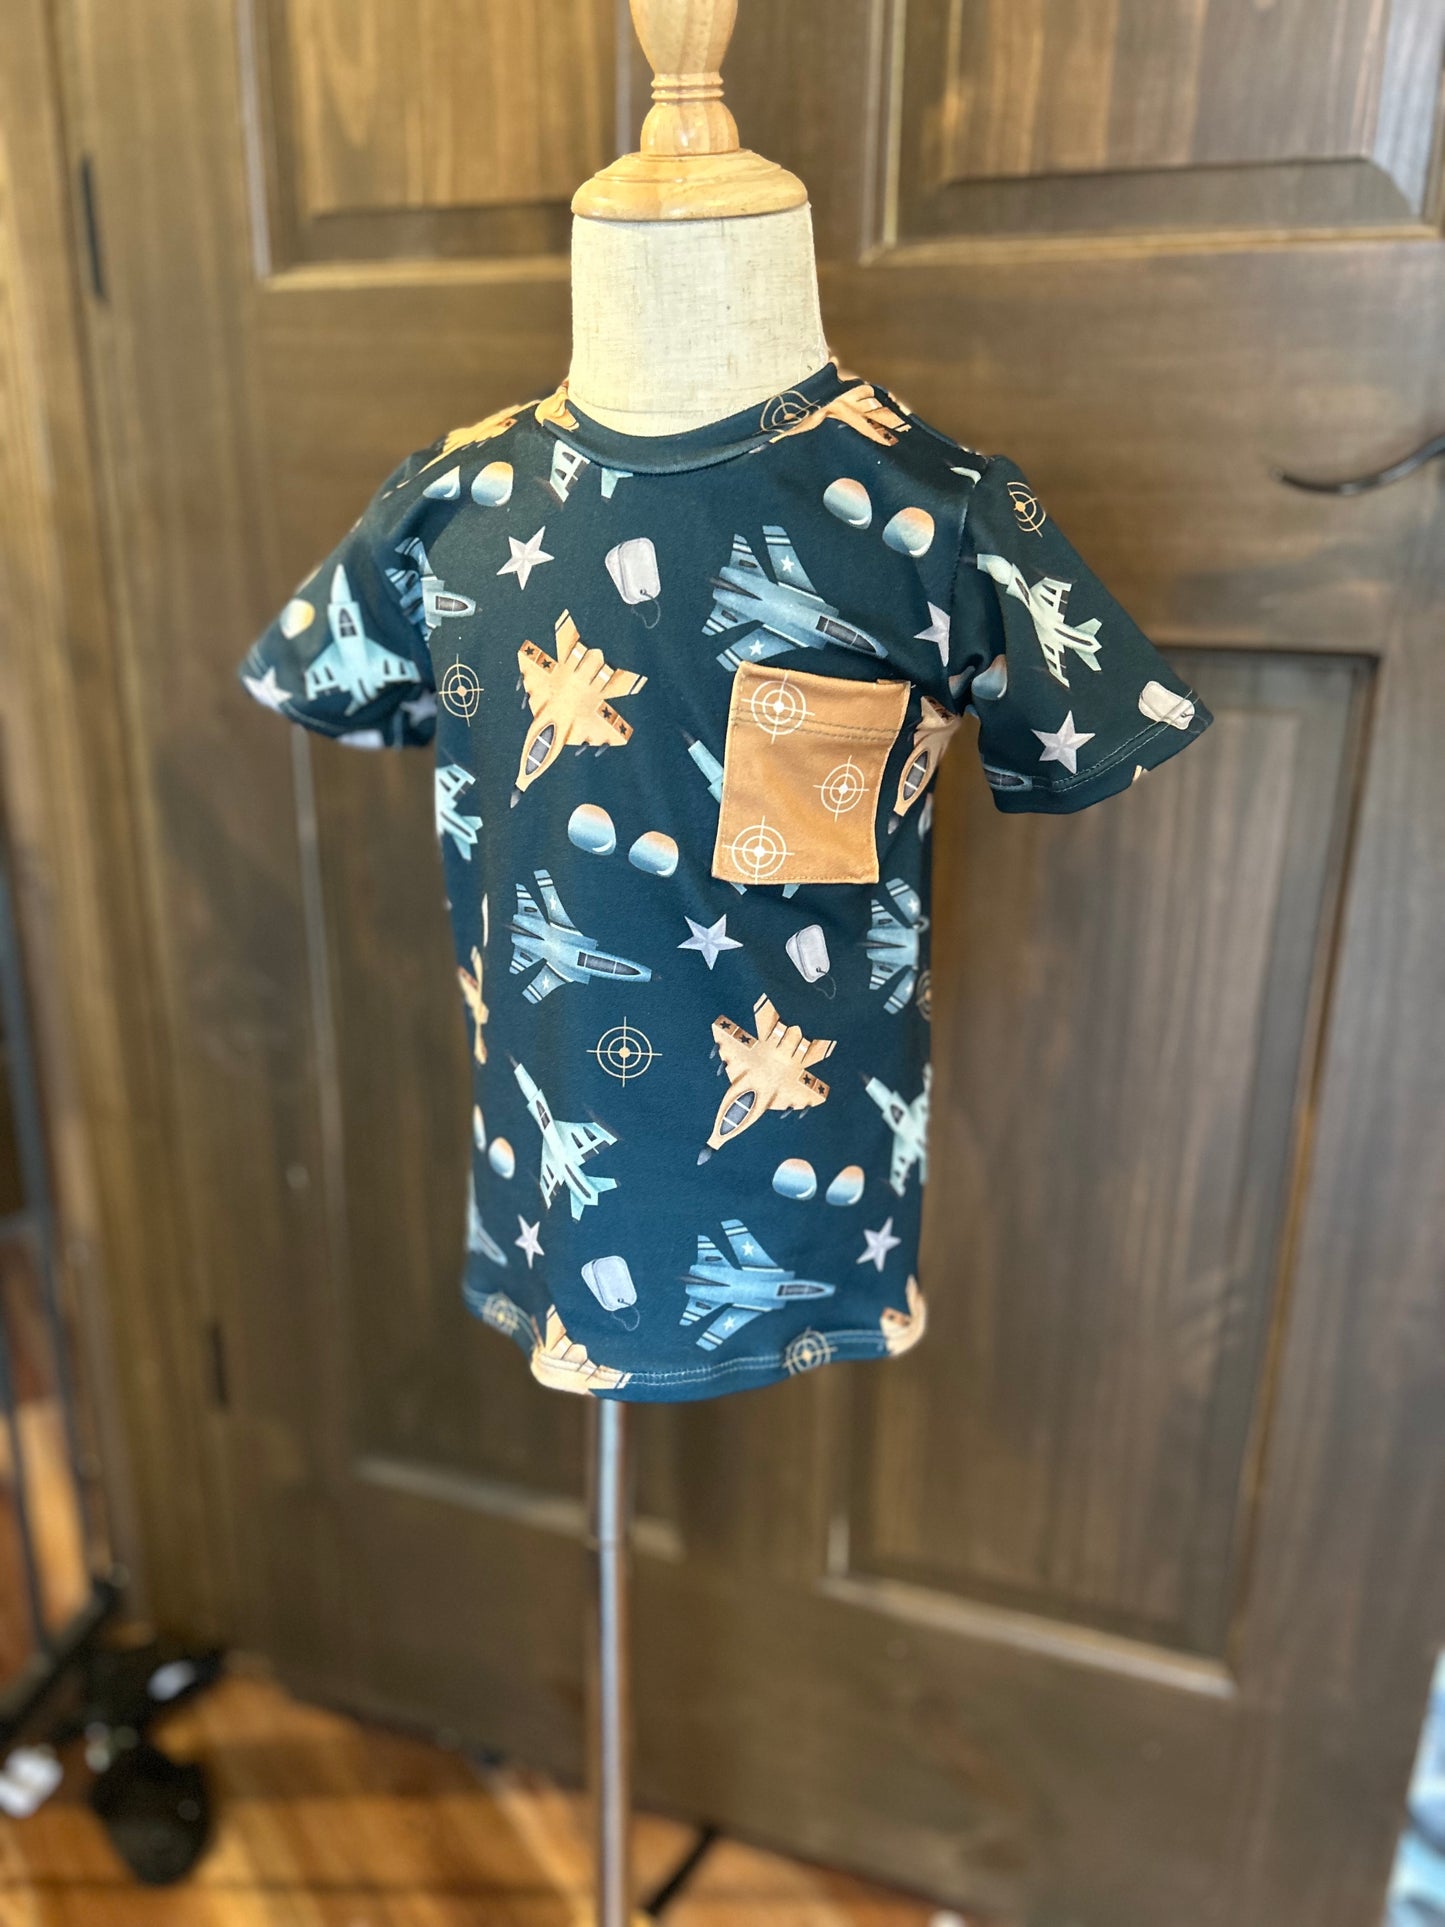 Wingman Simple Tee with Pocket - 2T